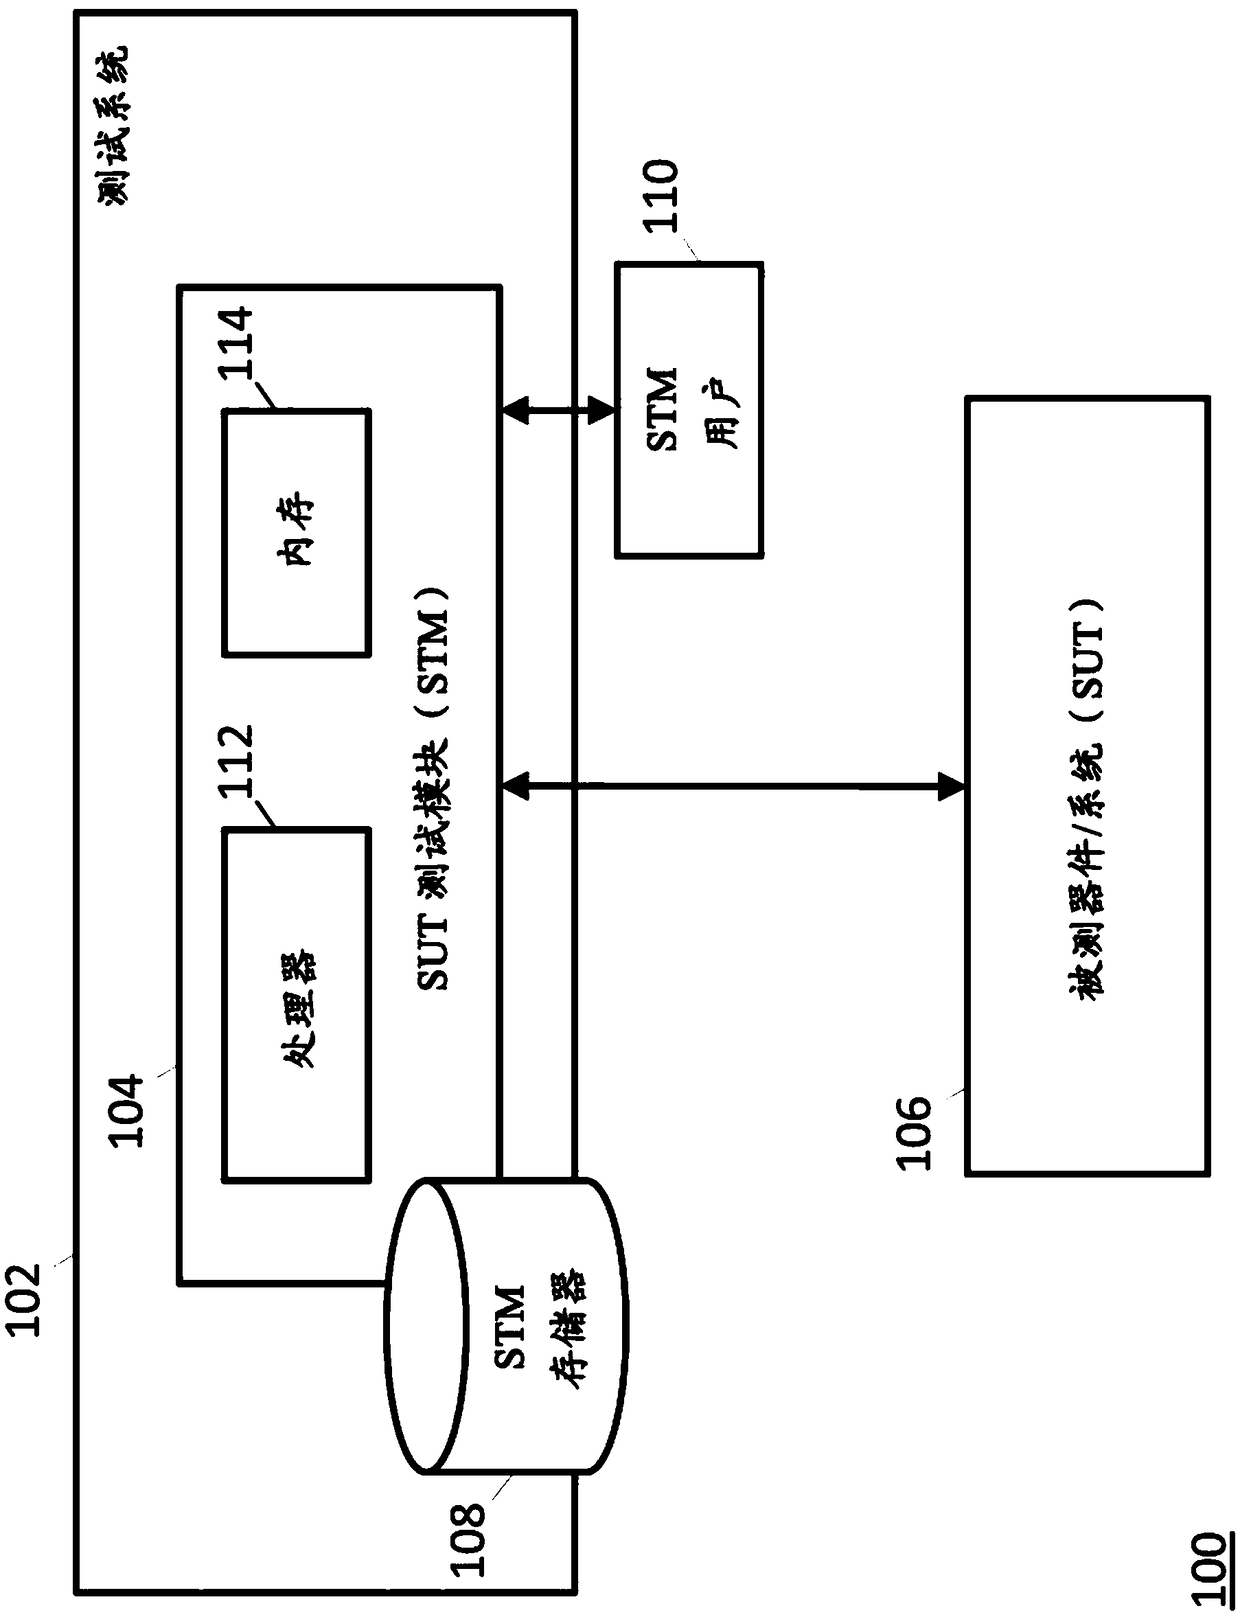 Methods, systems, and computer readable media for testing time sensitive network (TSN) elements